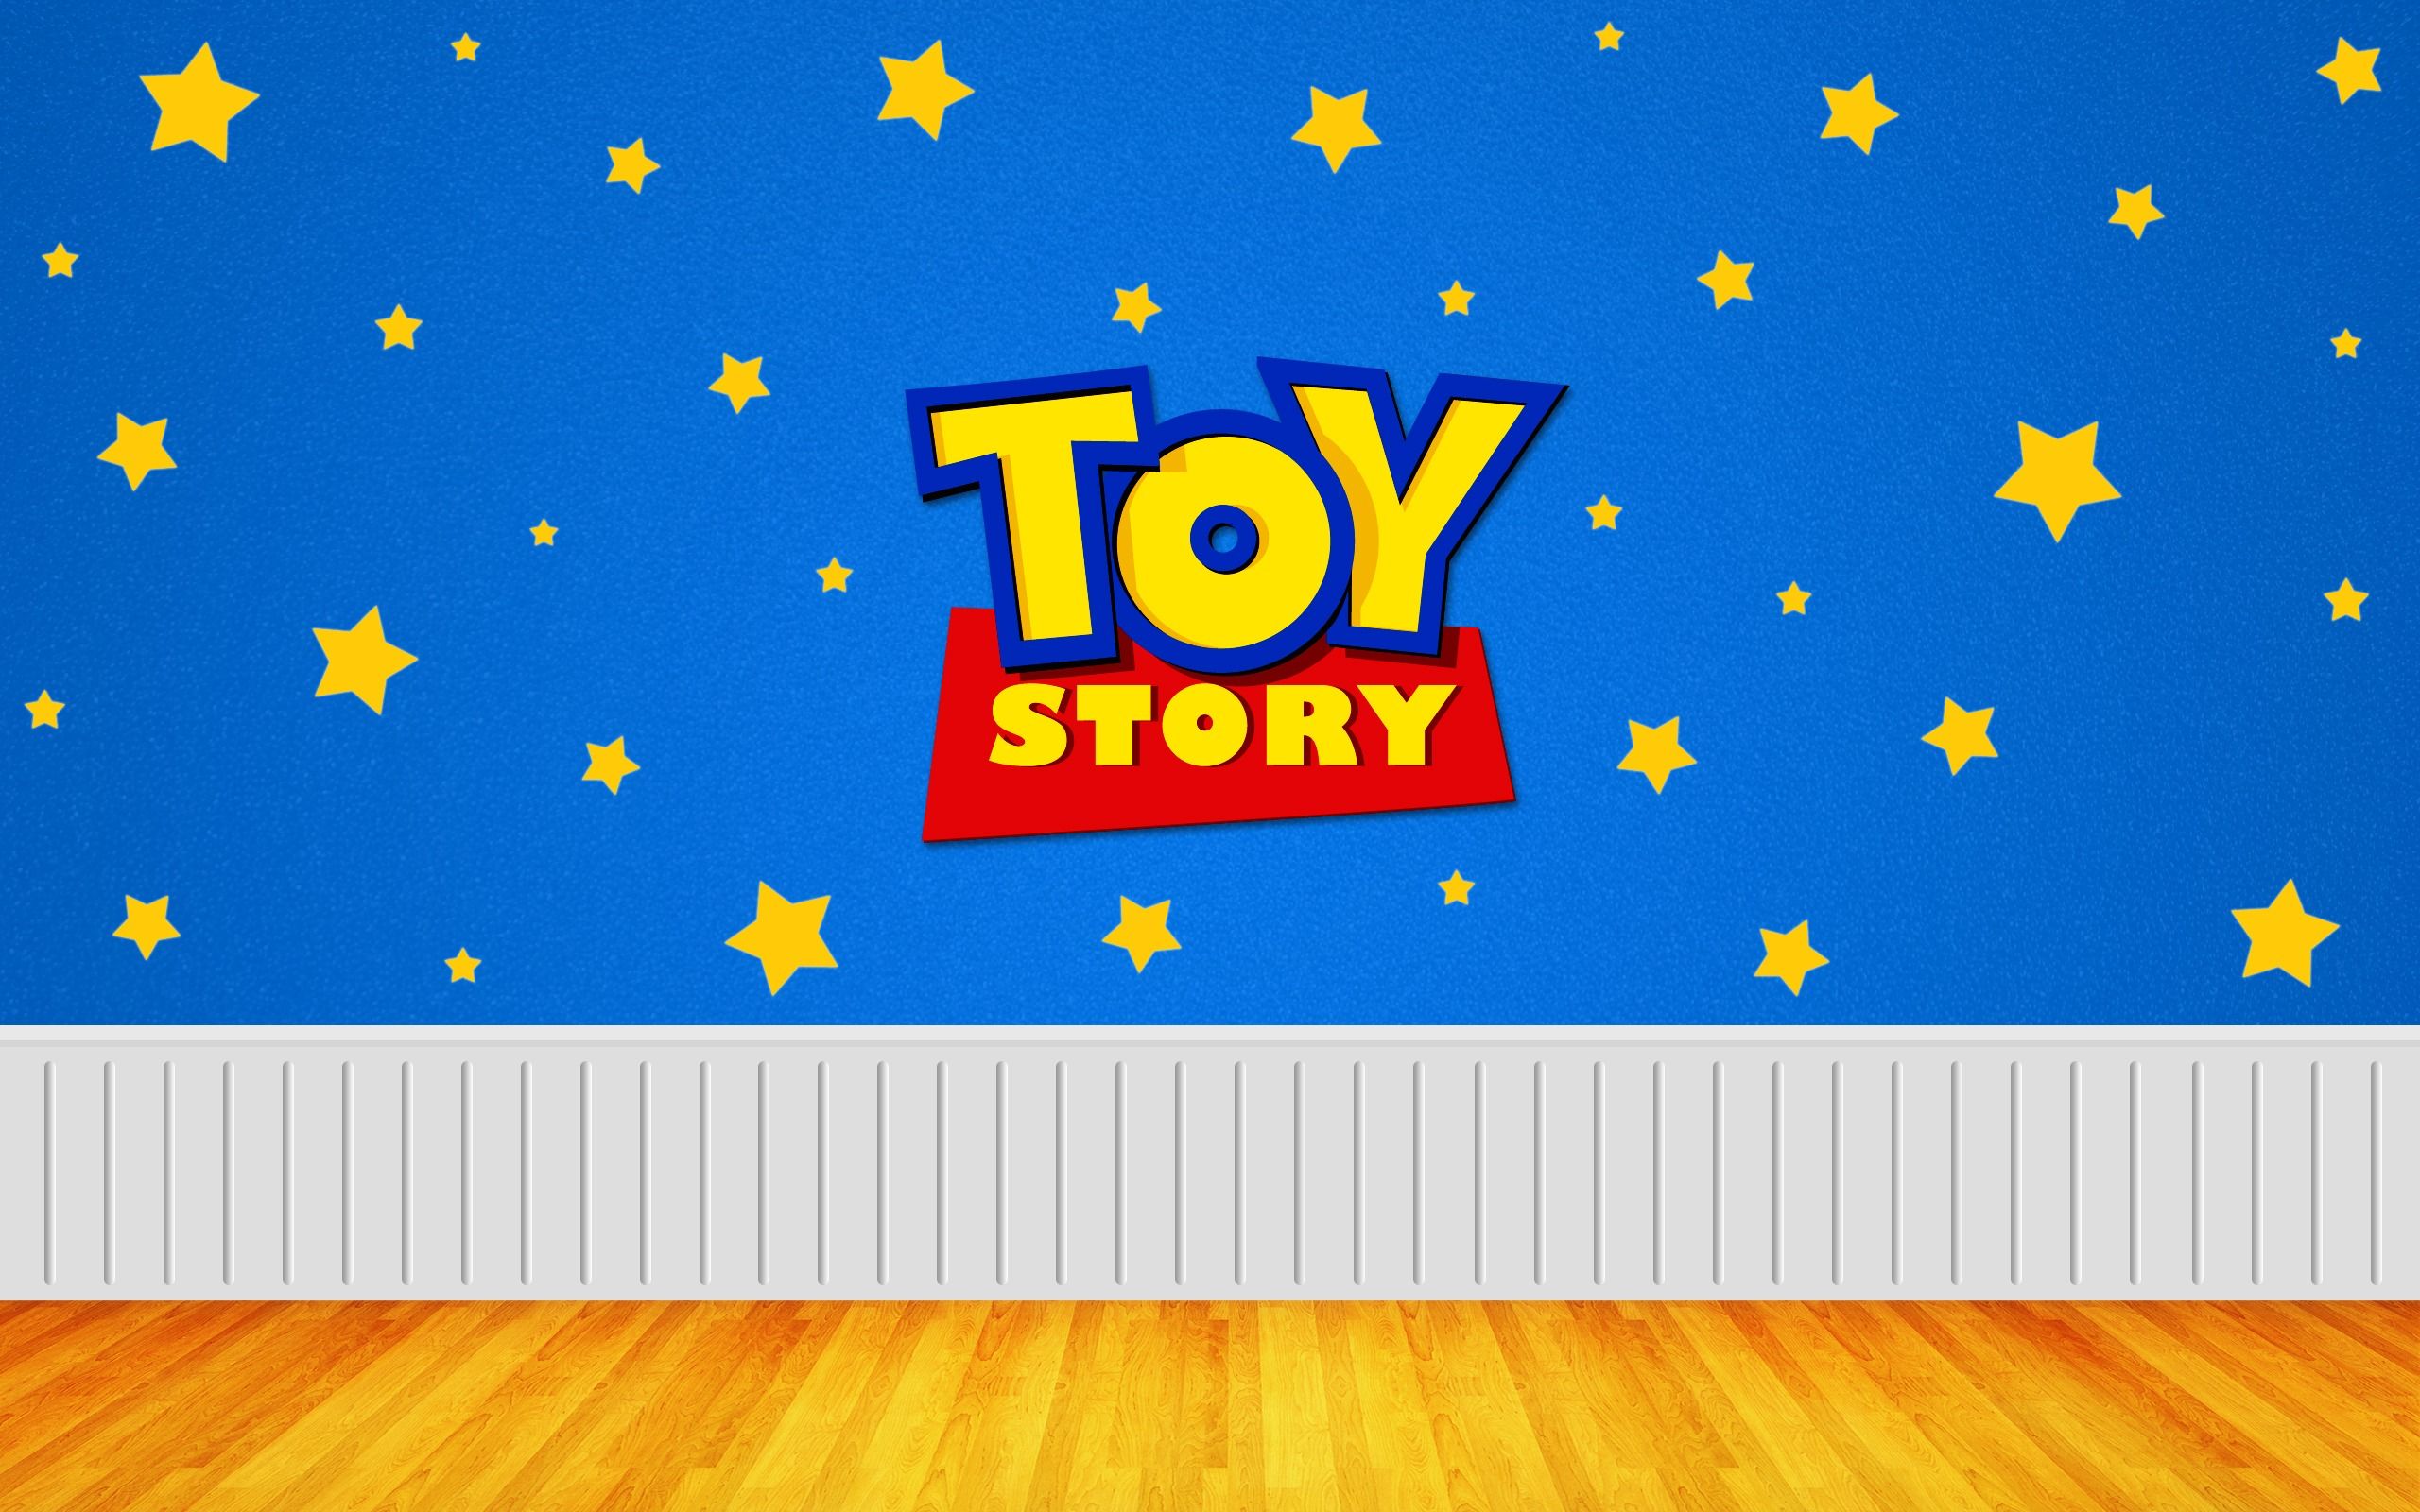 Toy-Story-Wallpaper-Movies-Free-Download.jpg